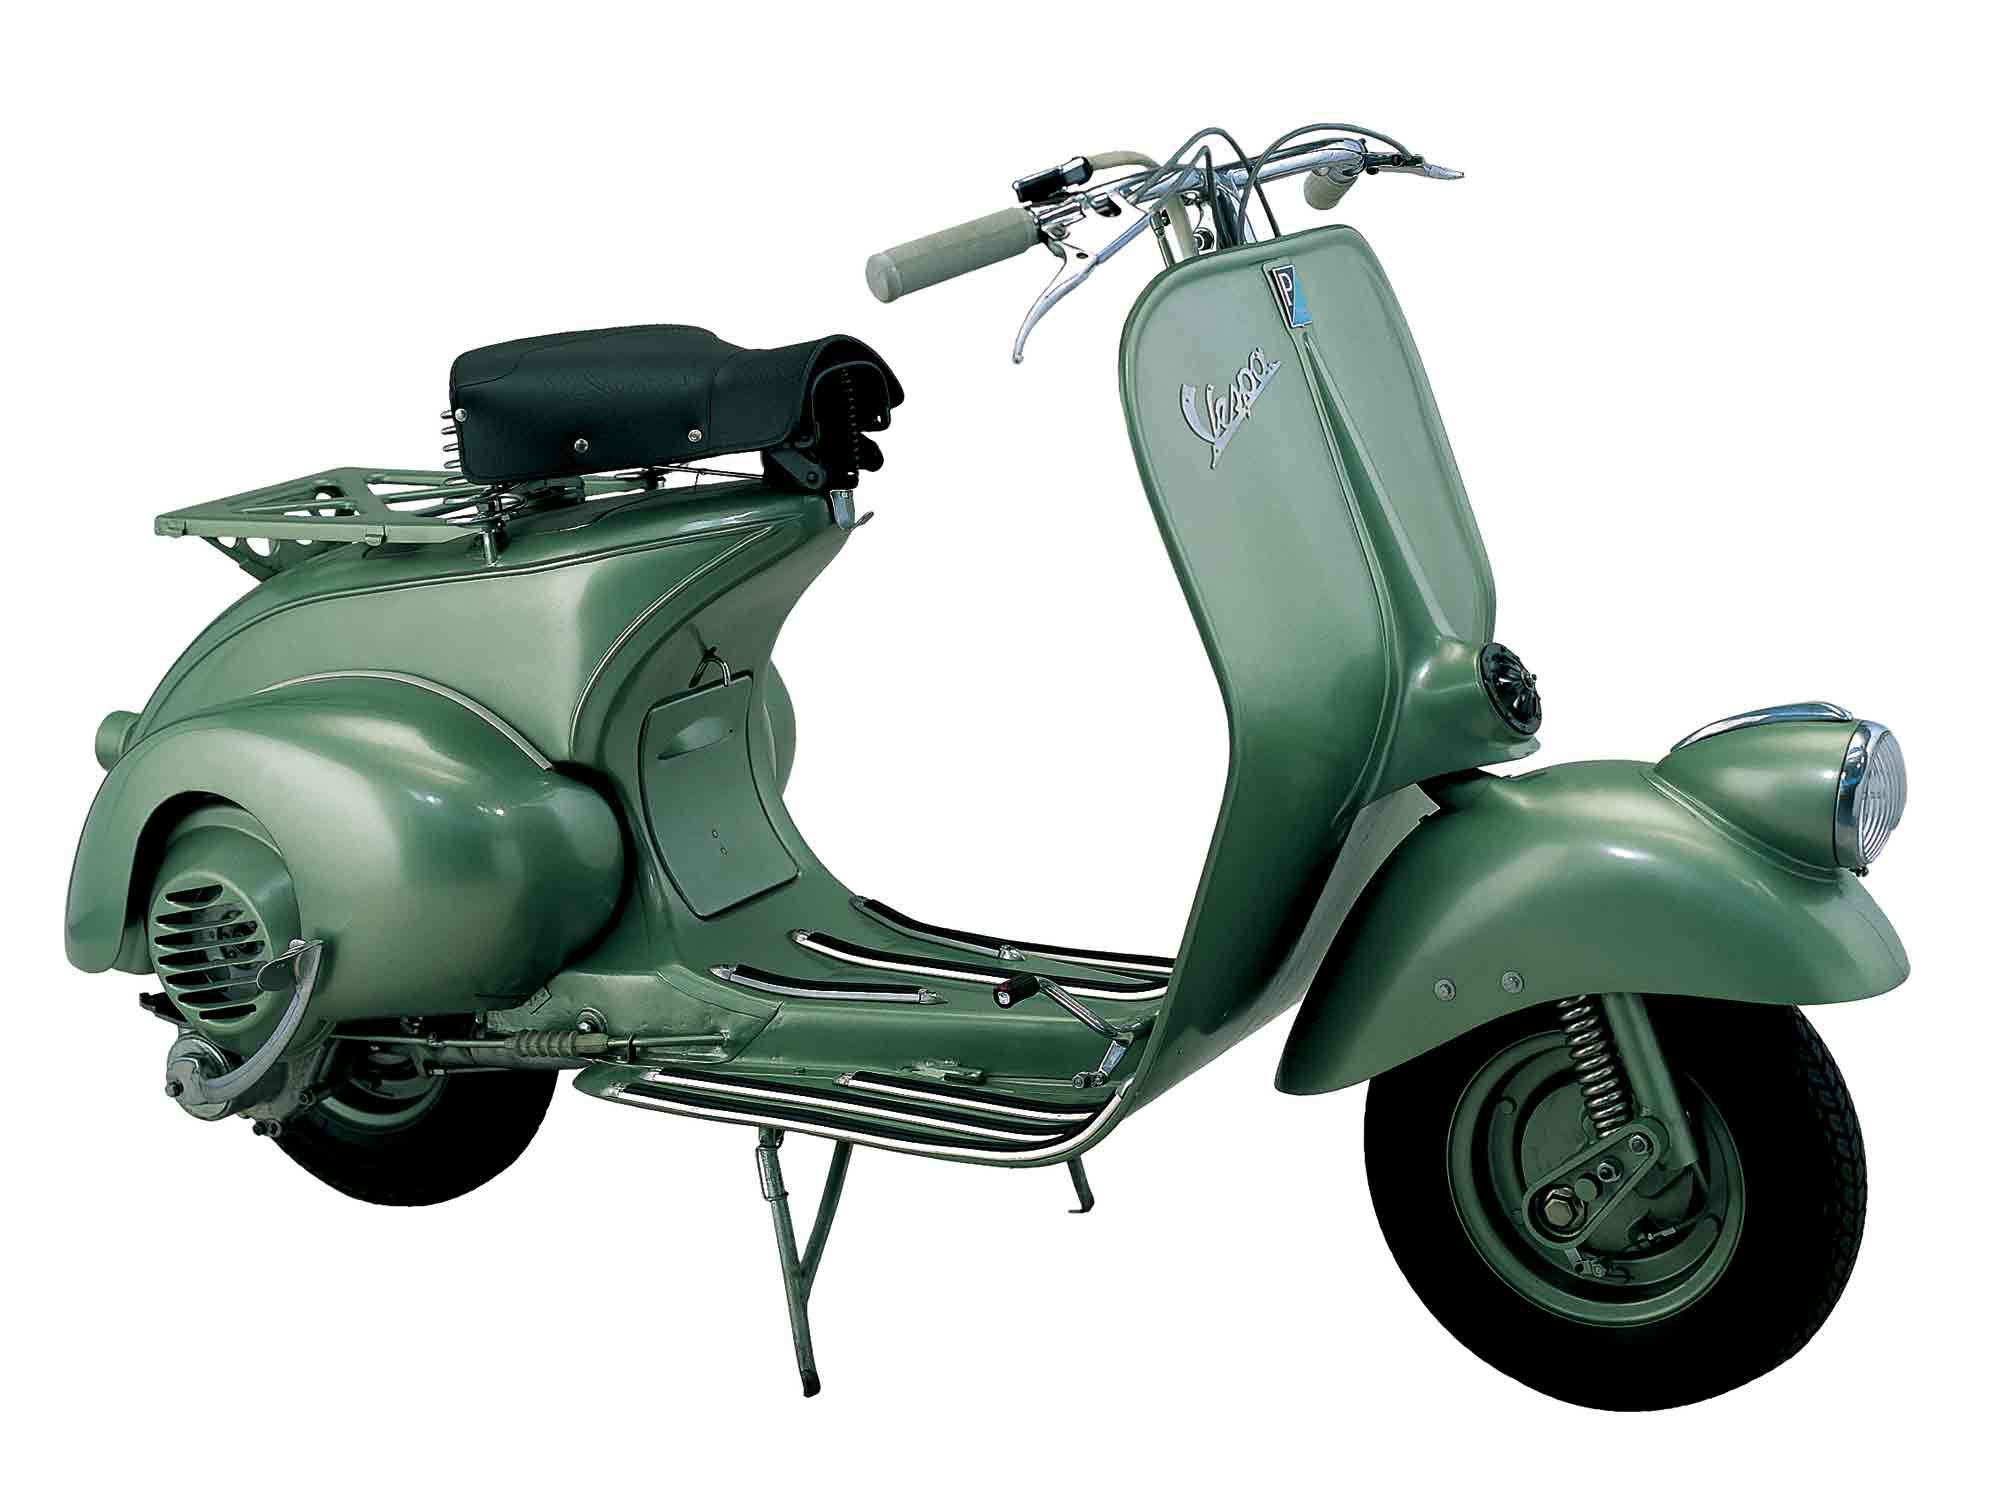 Retrospective has Wide-Mount, Large Frame, and Small Frame conversion kits for Vespa models, as well as conversion kits for Lambretta Li series 1-3, GP, and J range scooters.